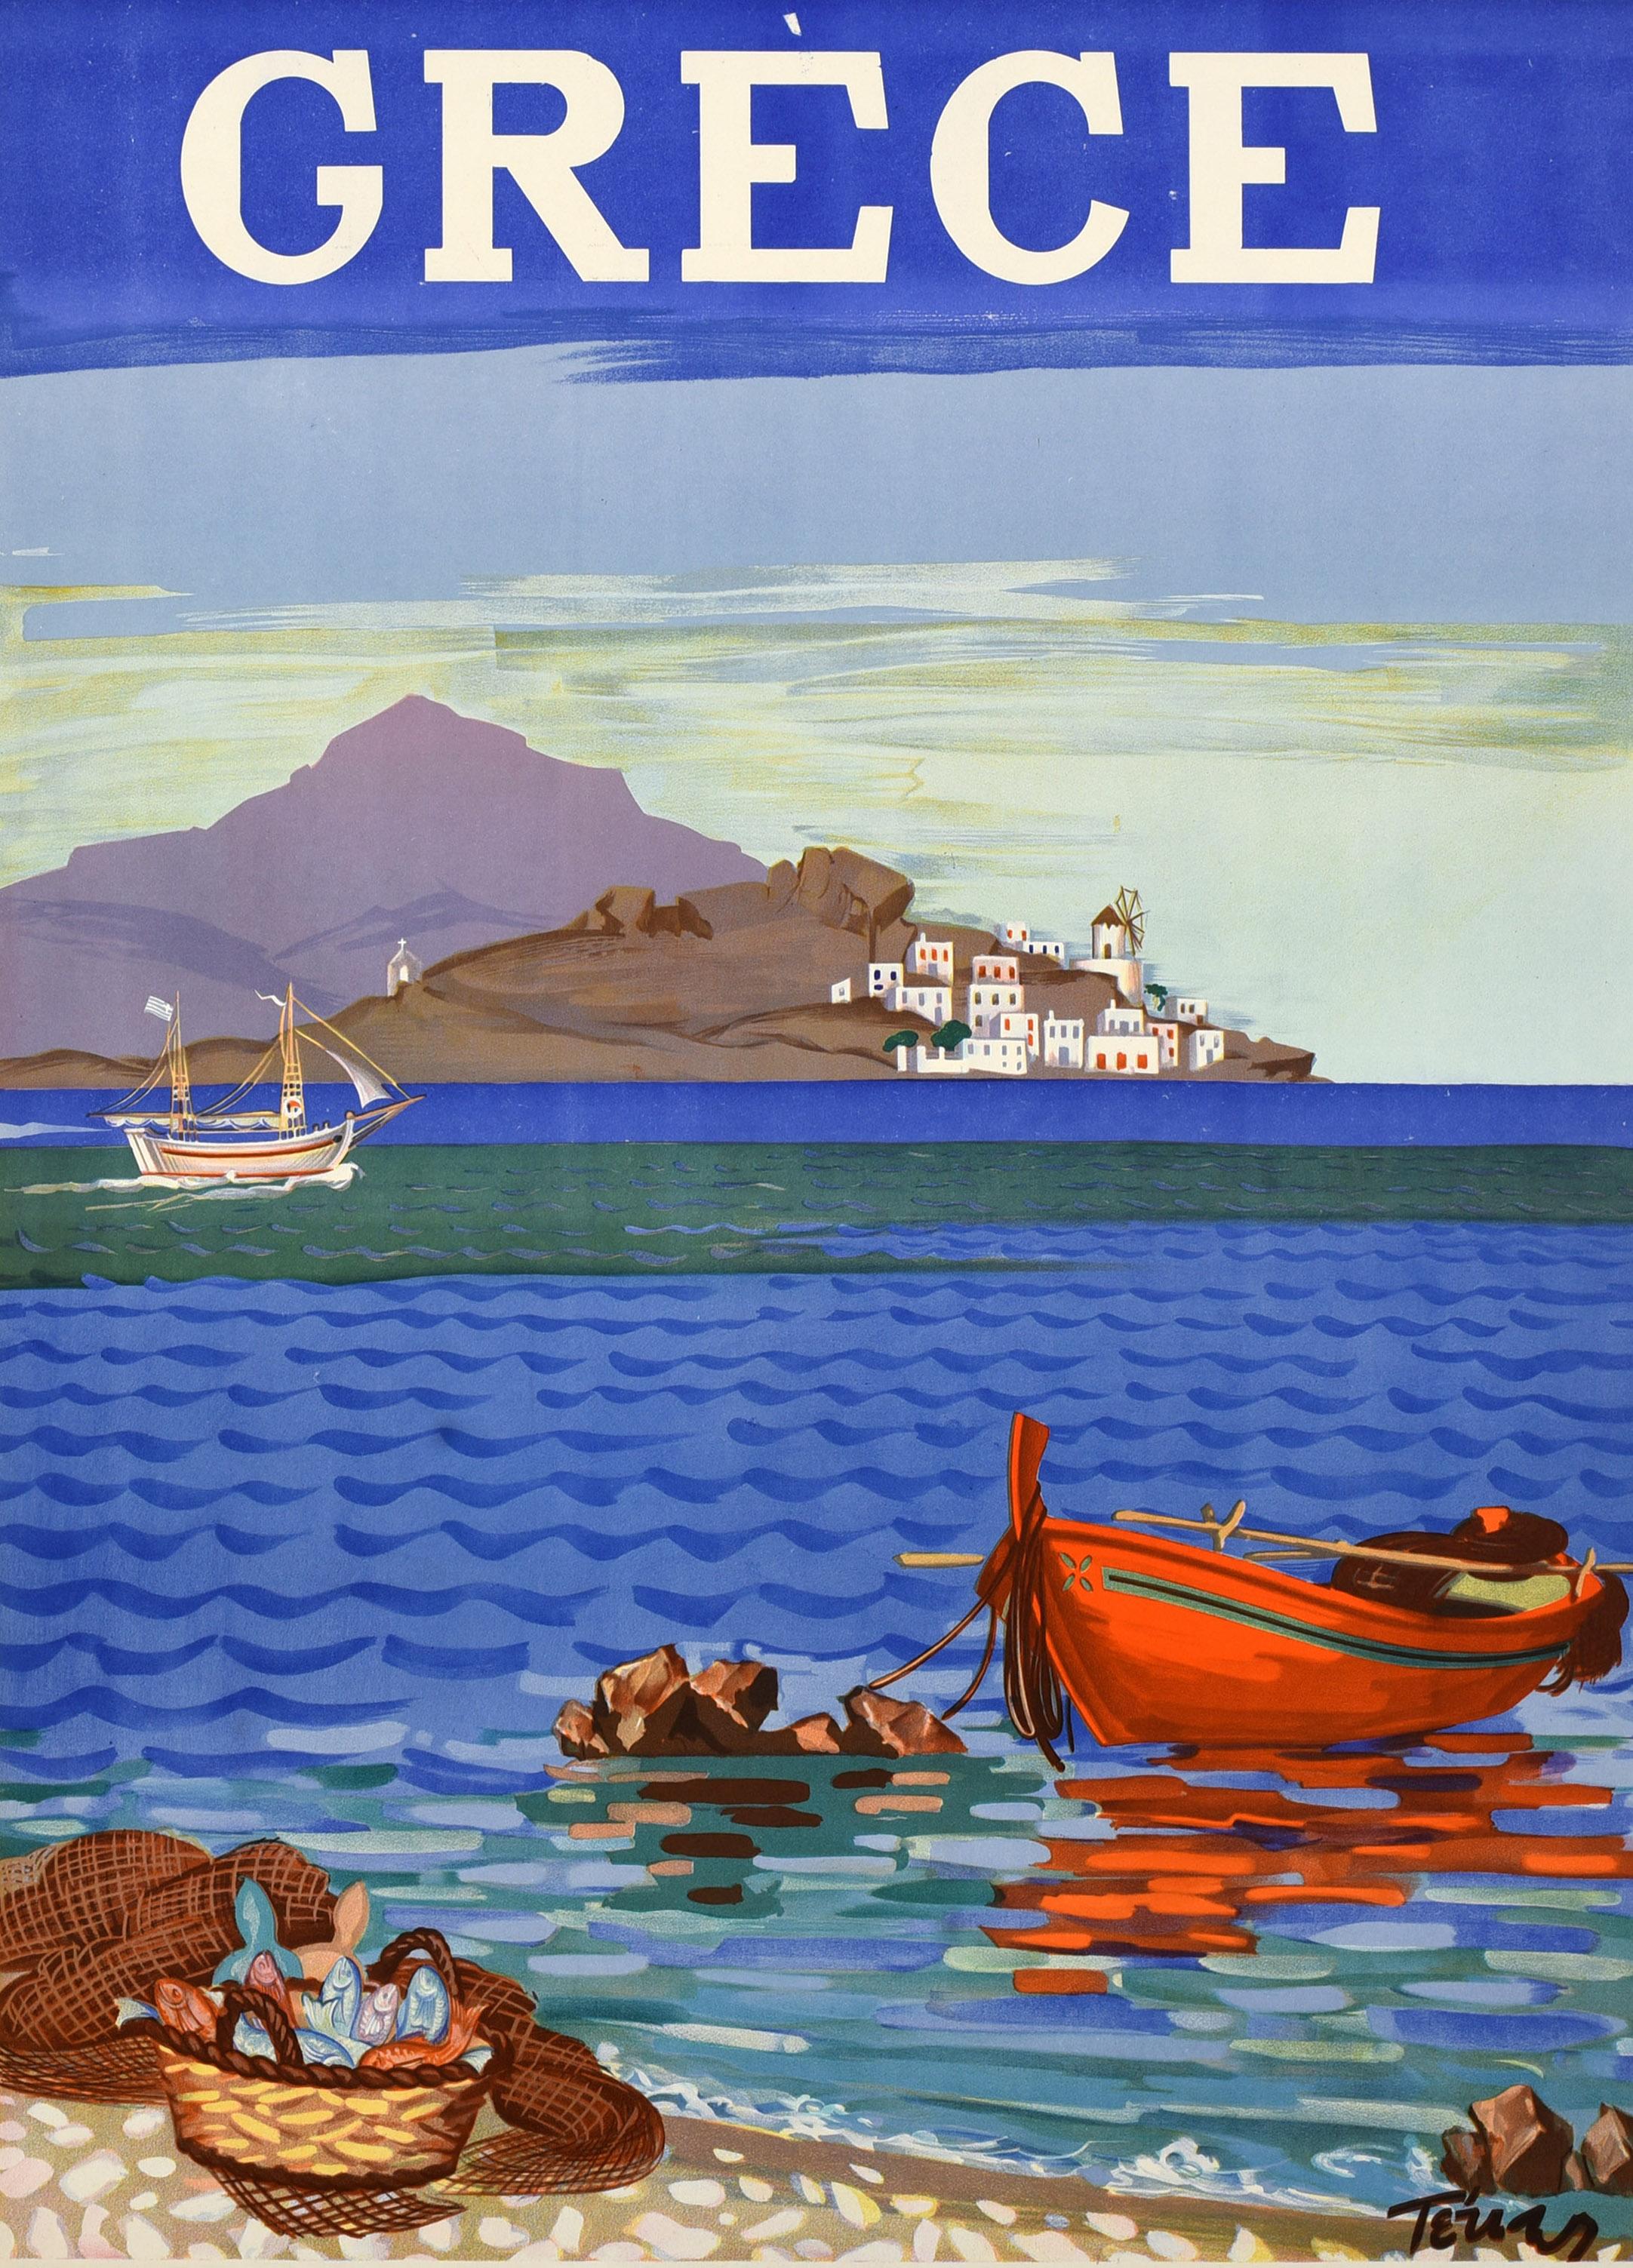 Original vintage travel poster - Greece Aegean Sea Coastline / Grece Littoral de la mer egee - featuring a colourful seaside view depicting a wooden rowing boat moored to a rock and reflected on the water near fishing nets and a basket of fish on